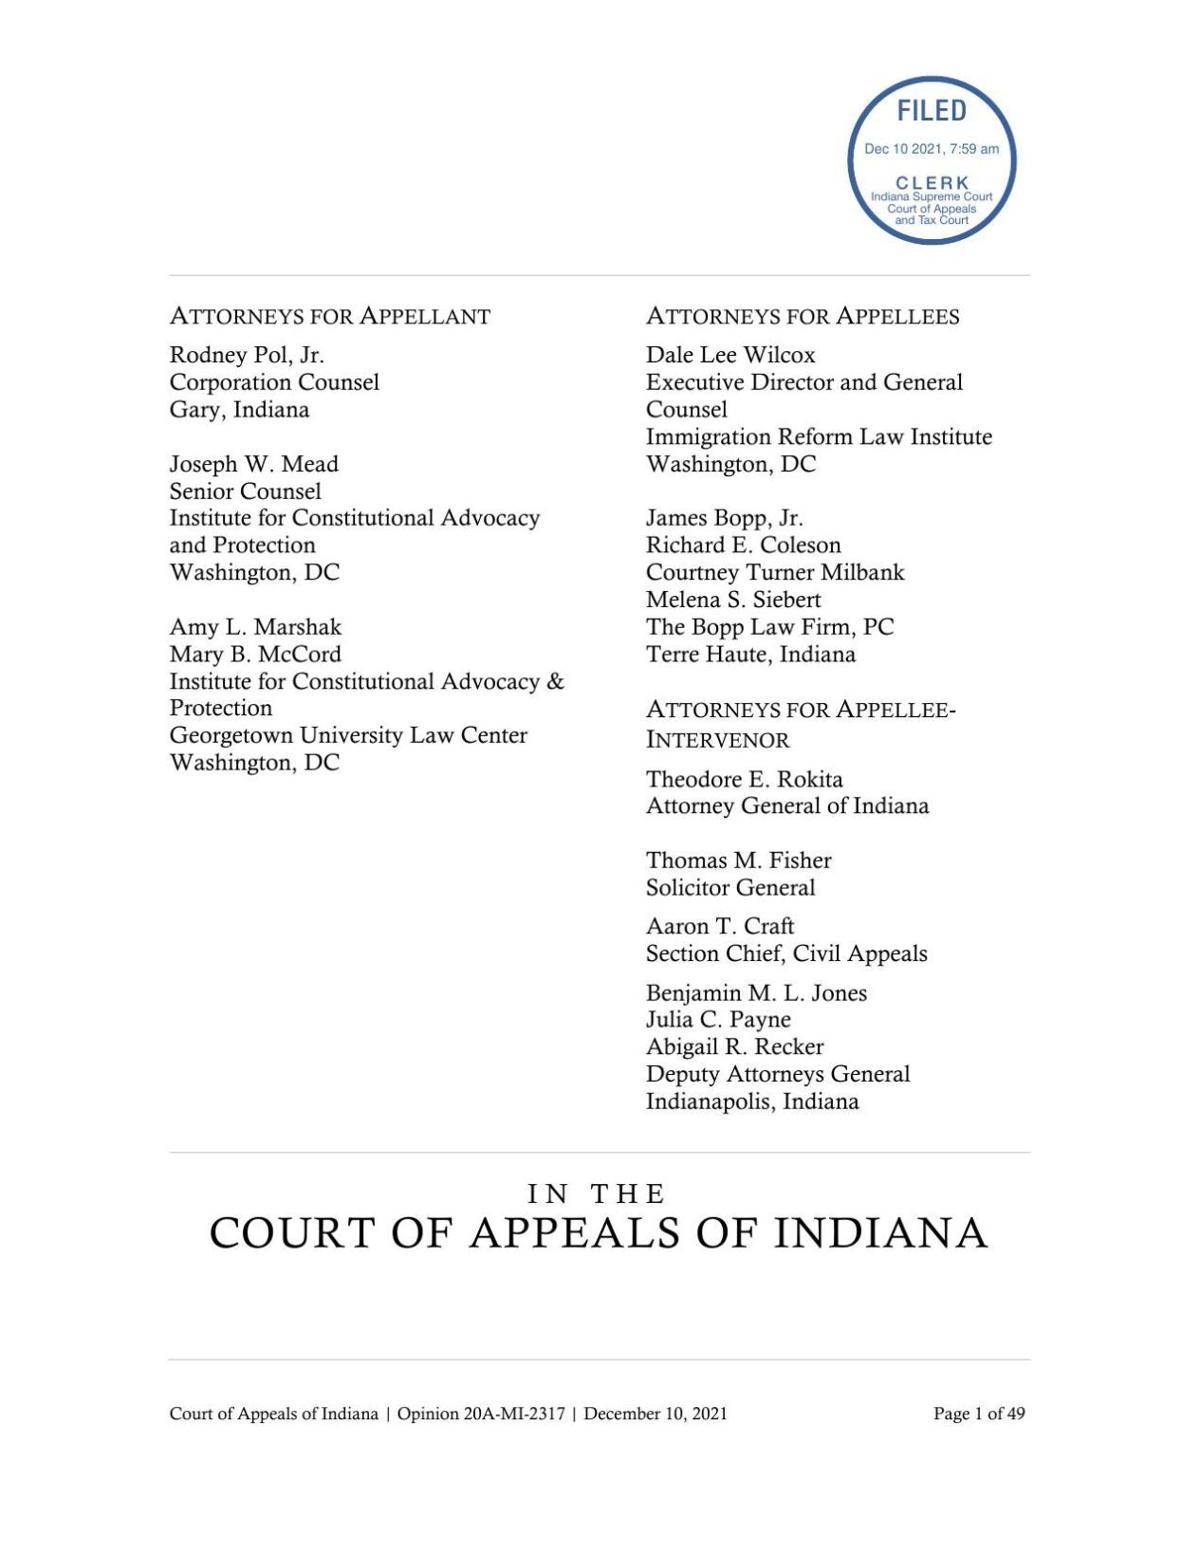 Gary v. Nicholson ruling of Indiana Court of Appeals